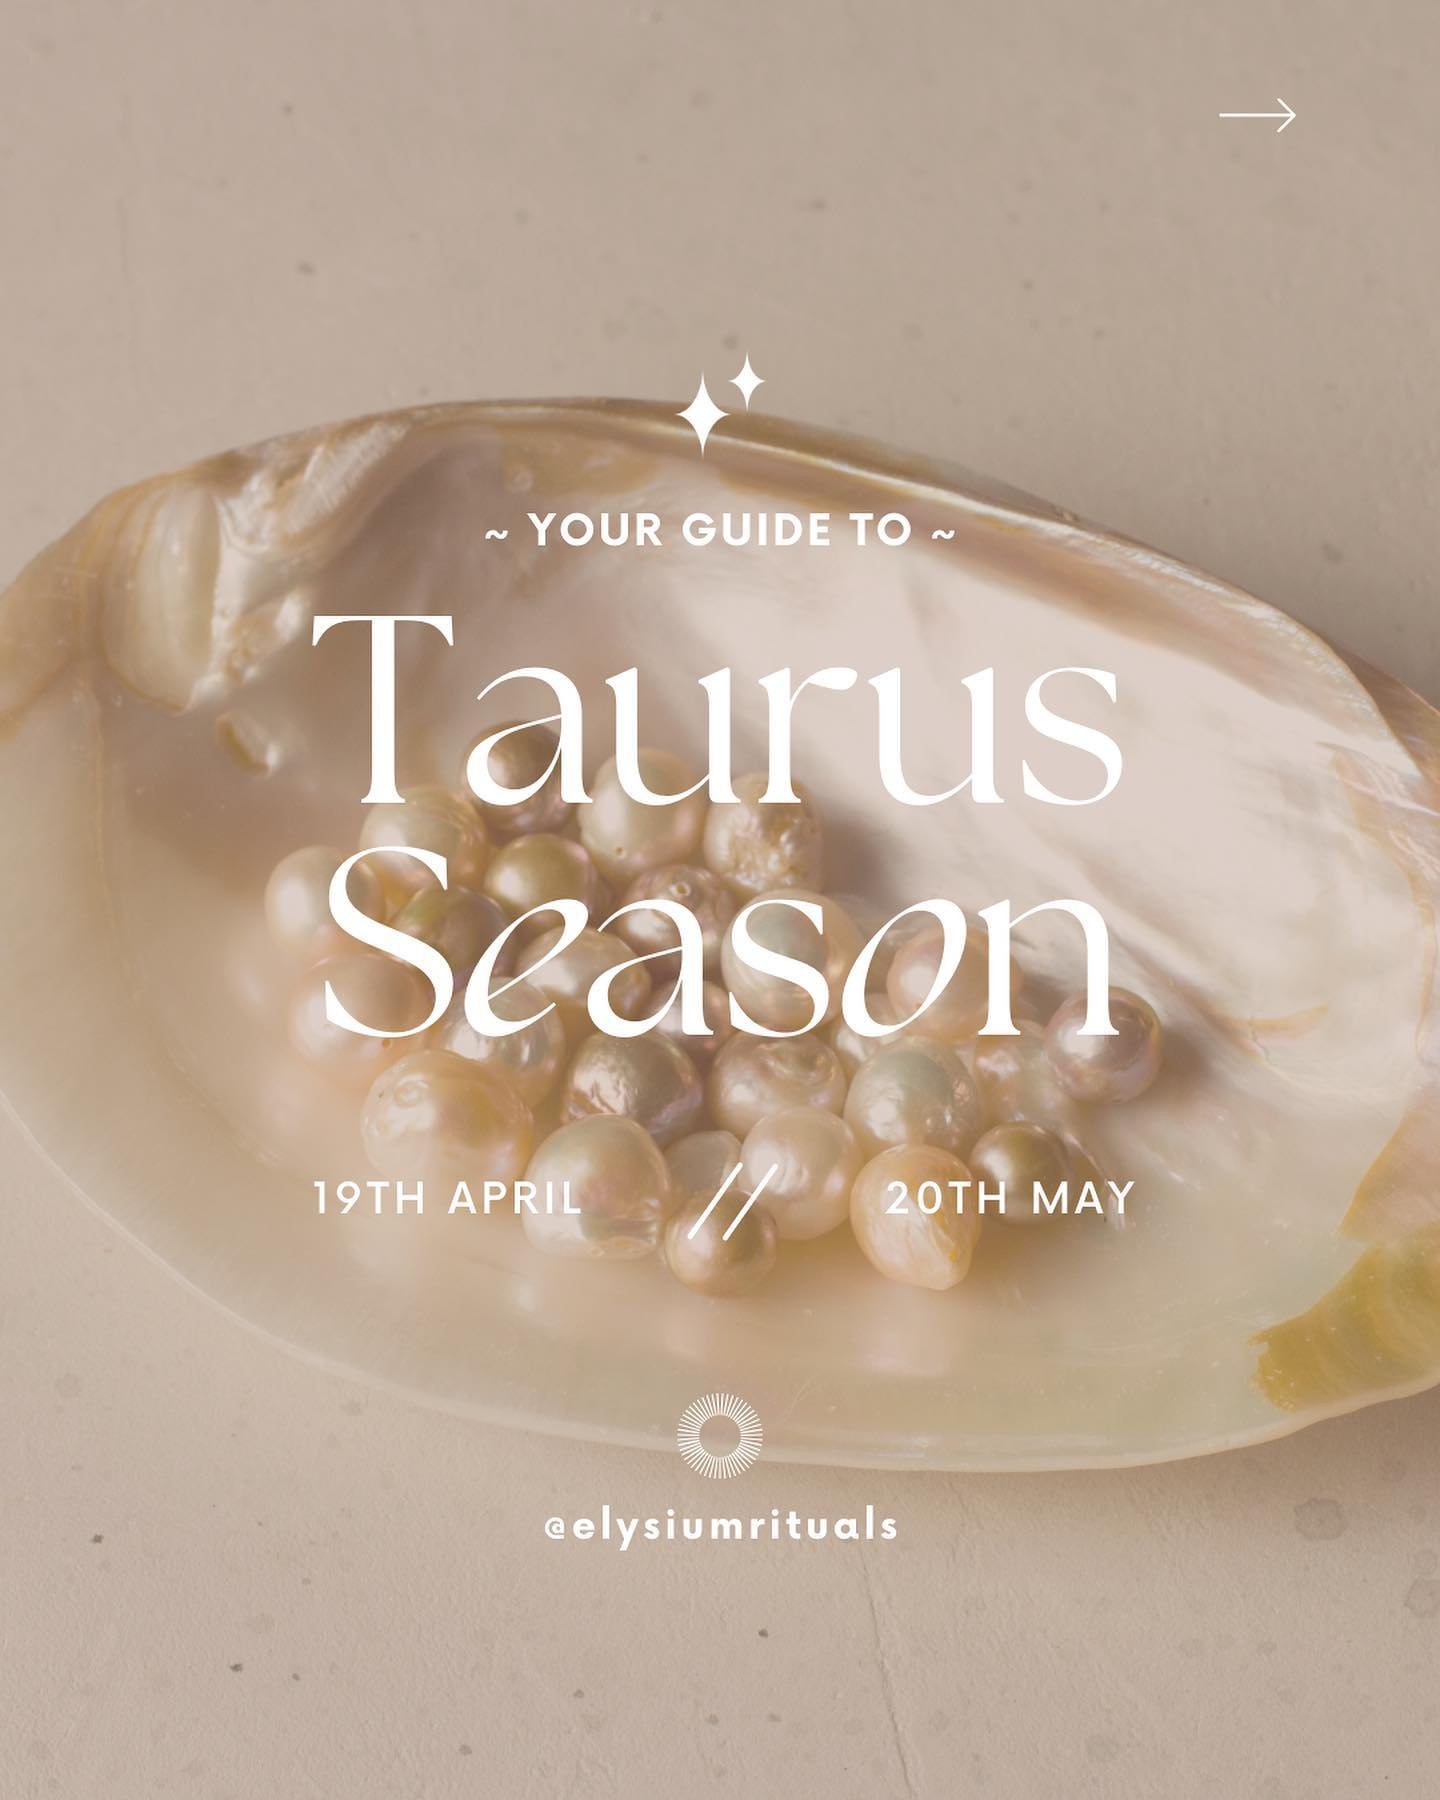 TAURUS SEASON:

After the flurry of Spring (and the Eclipses) we are called to slow down and tend to our soil, to literally stop and smell the roses 🌹

Ruled by Venus, it is a time for indulging the senses and everything that makes life beautiful!

